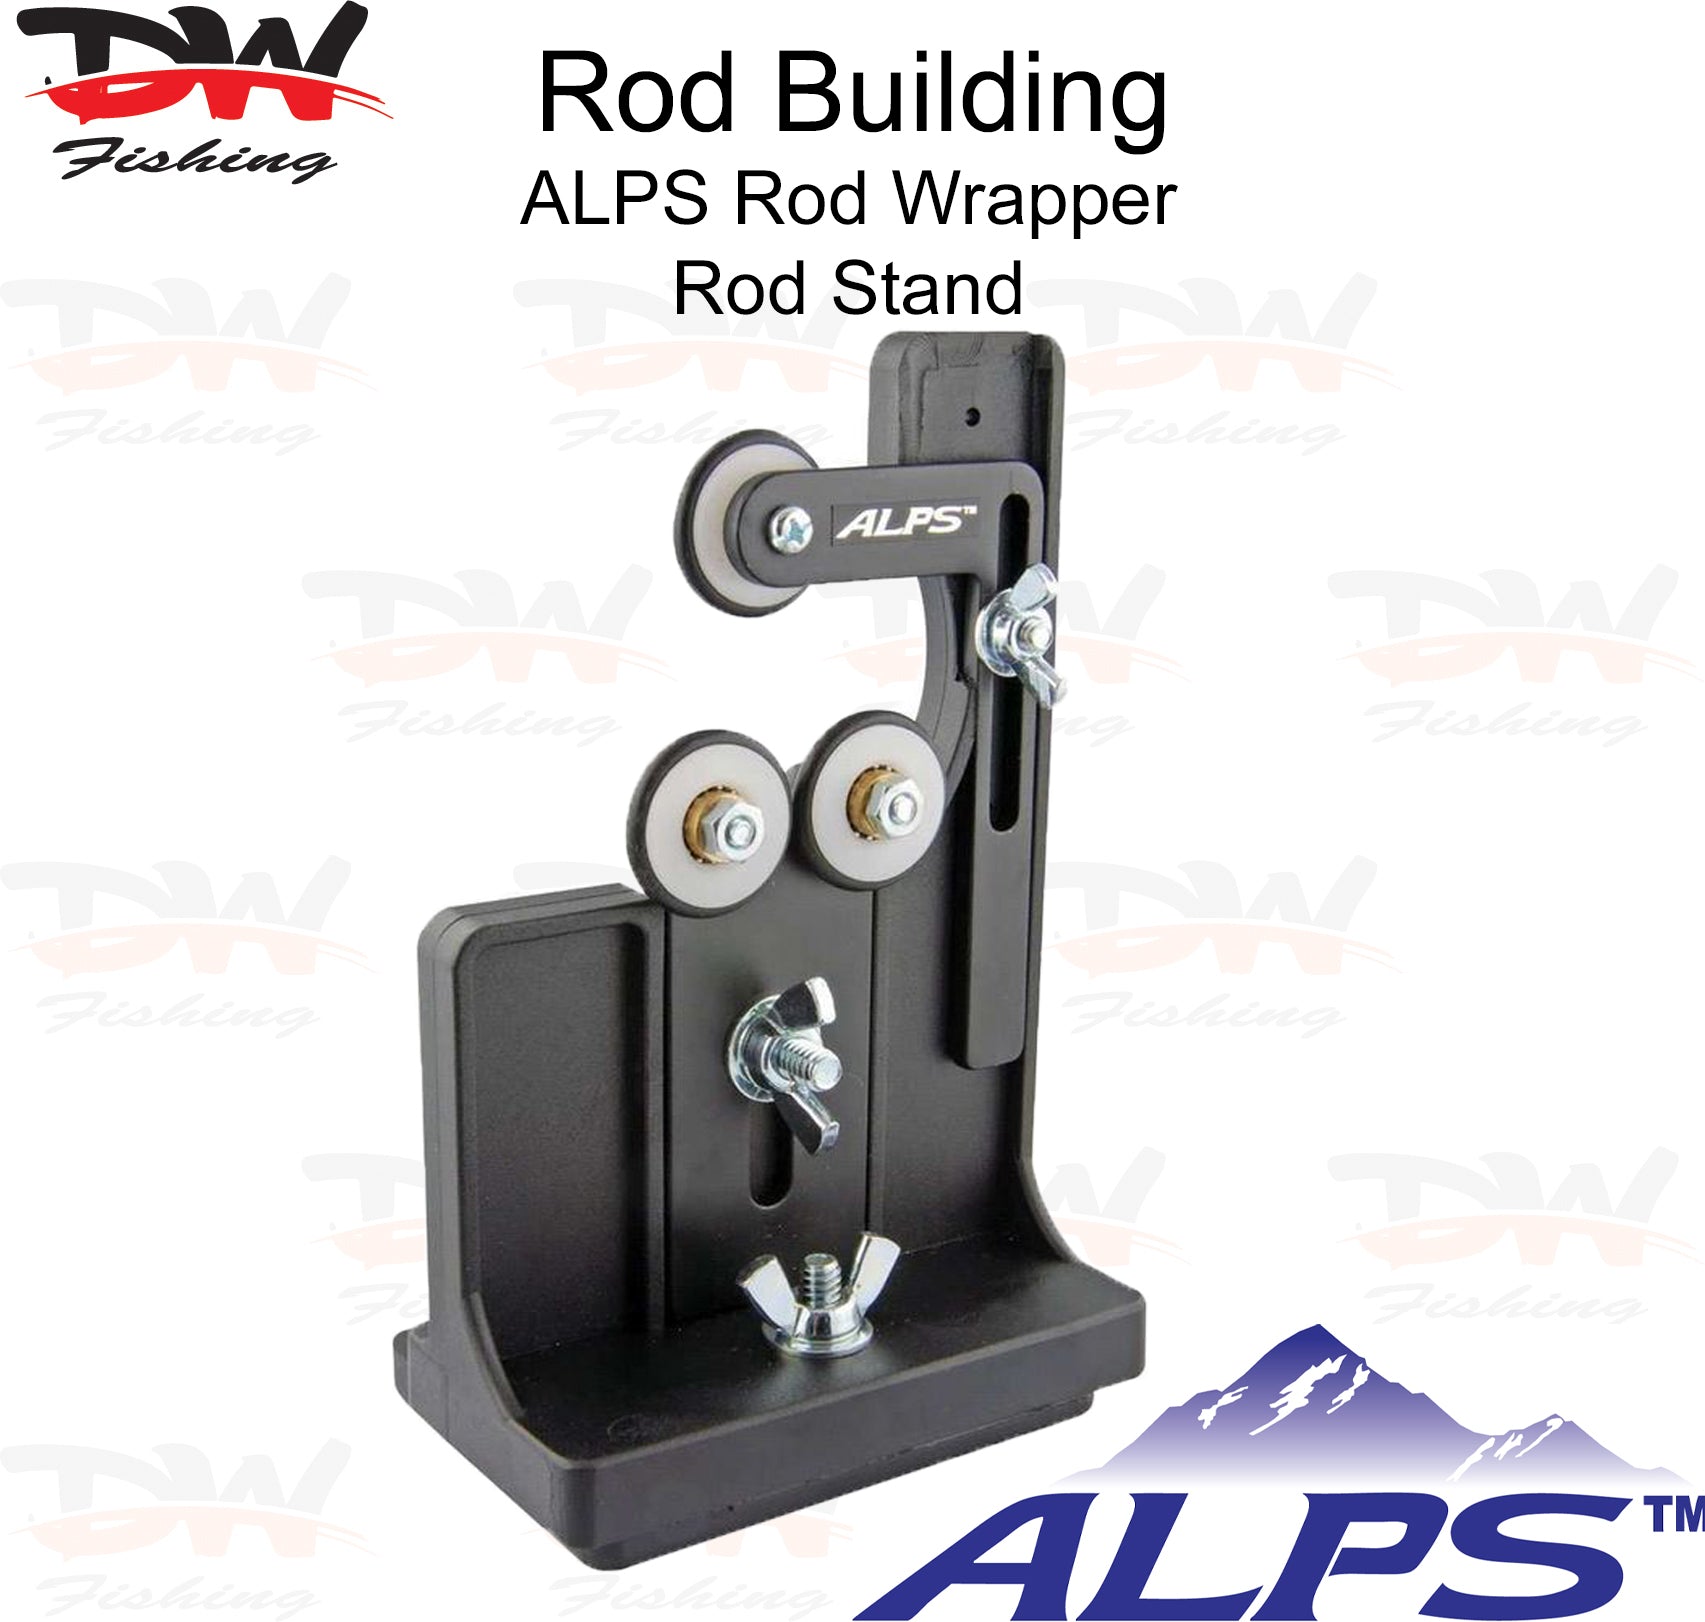 ALPS Rod Wrapper Support Stand, Rod Building